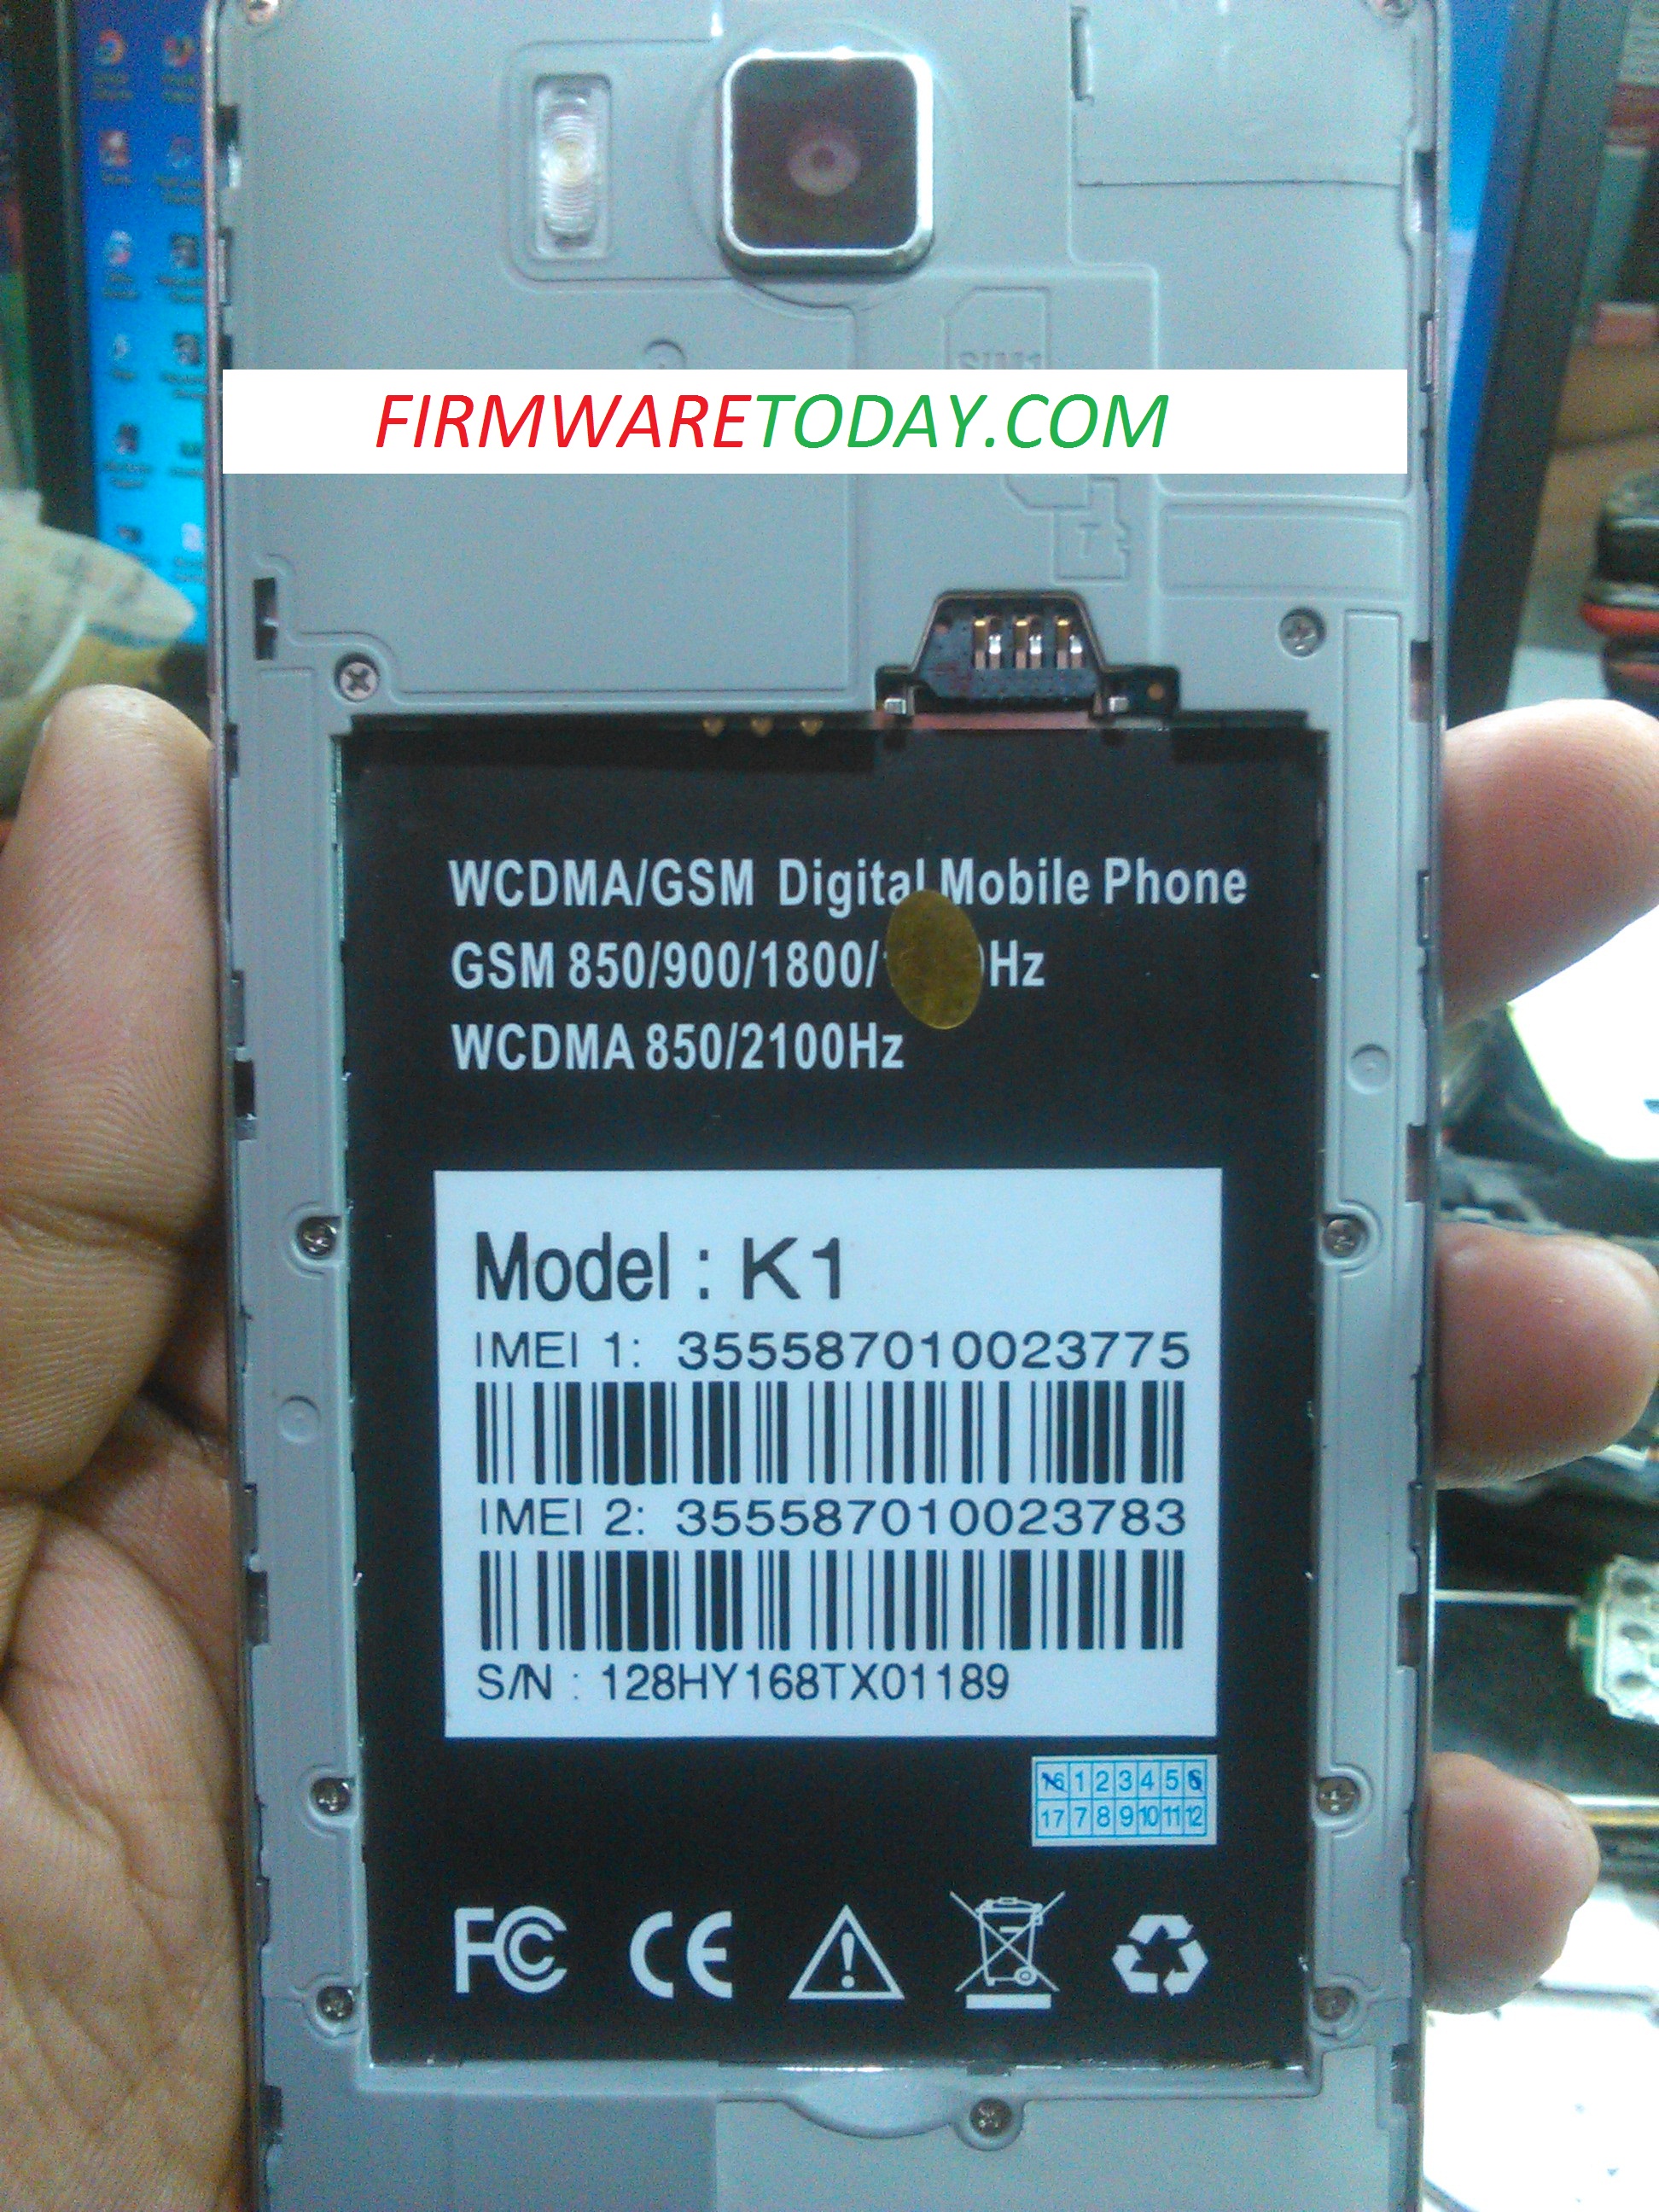 HUAWEI K1 OFFICIAL FIRMWARE 2ND UPDATE 2000% TESTED BY FIRMWARE.COM